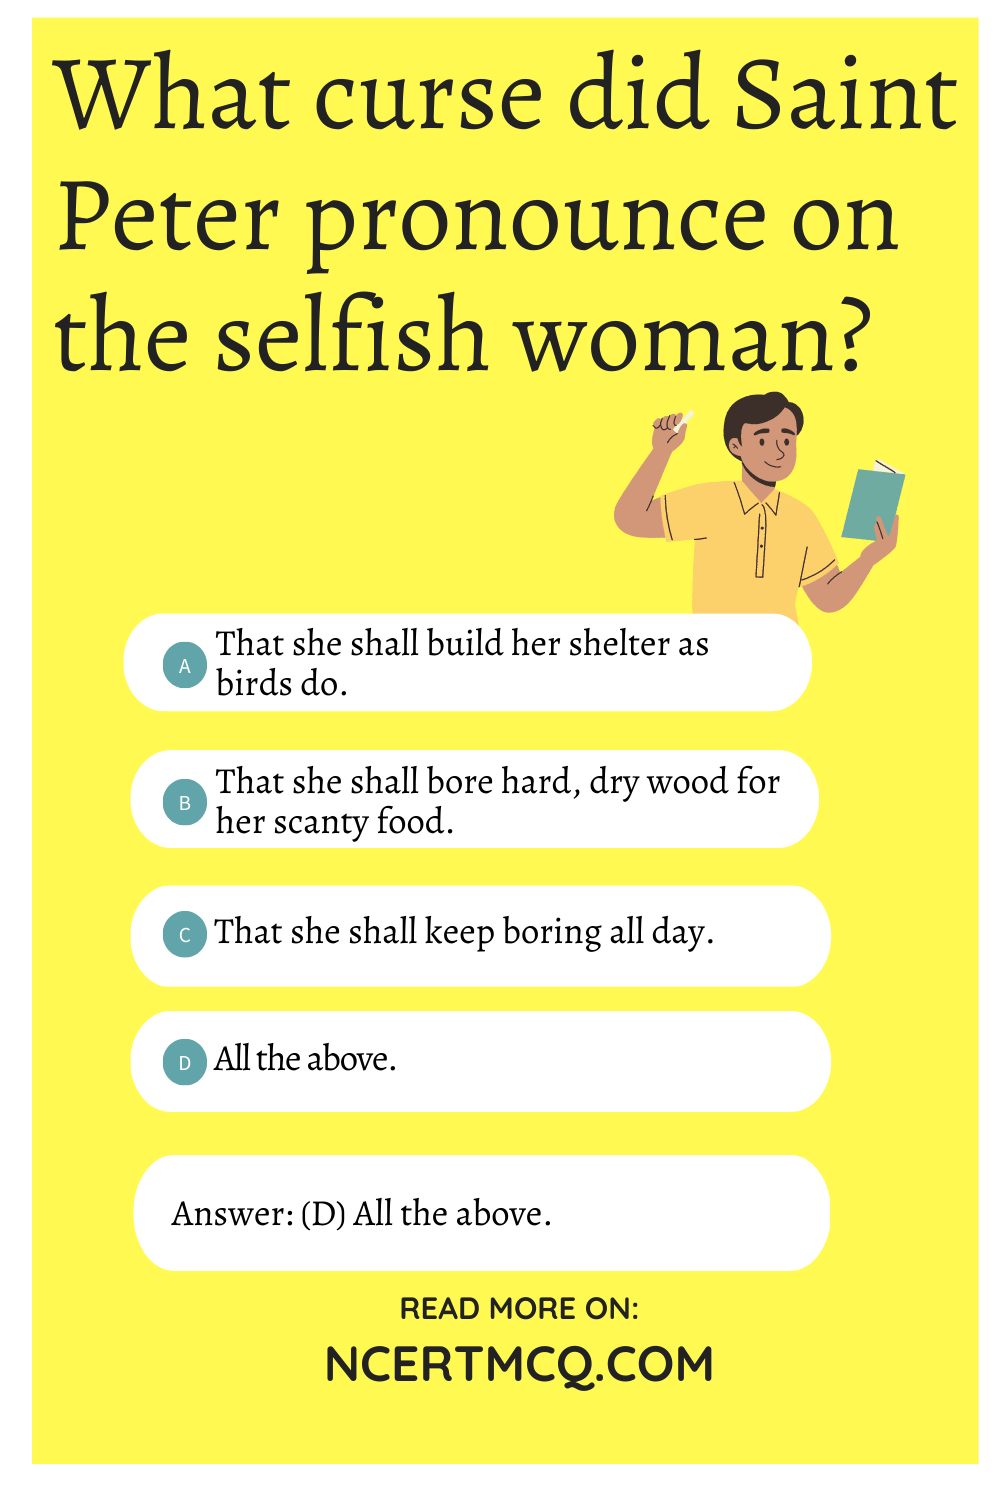 What curse did Saint Peter pronounce on the selfish woman?